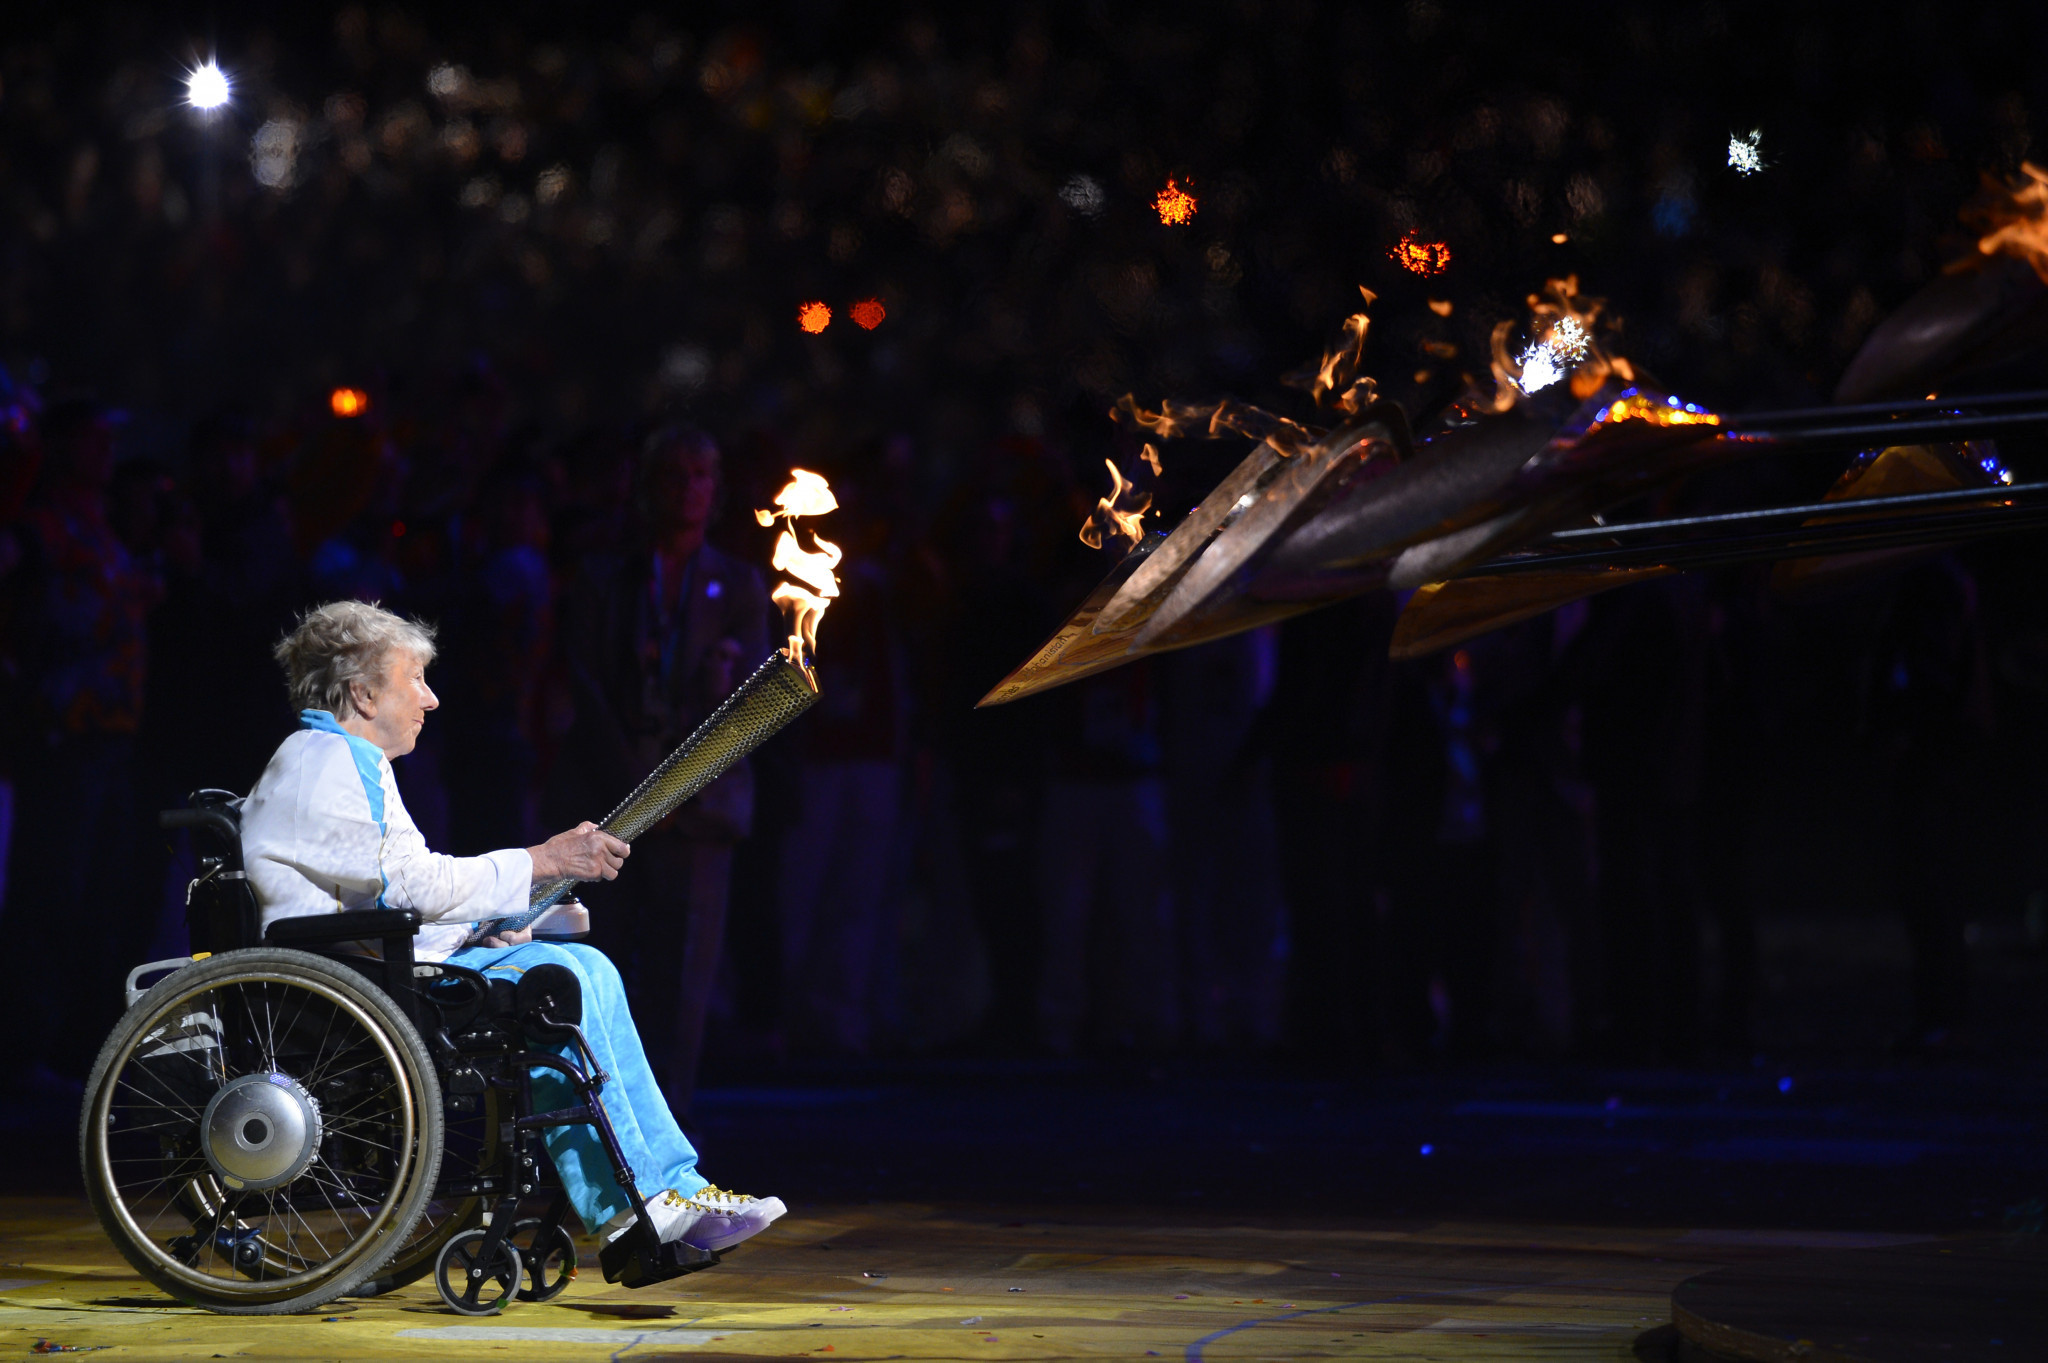 Margaret Maughan lit the Paralympic cauldron at London 2012 ©Getty Images